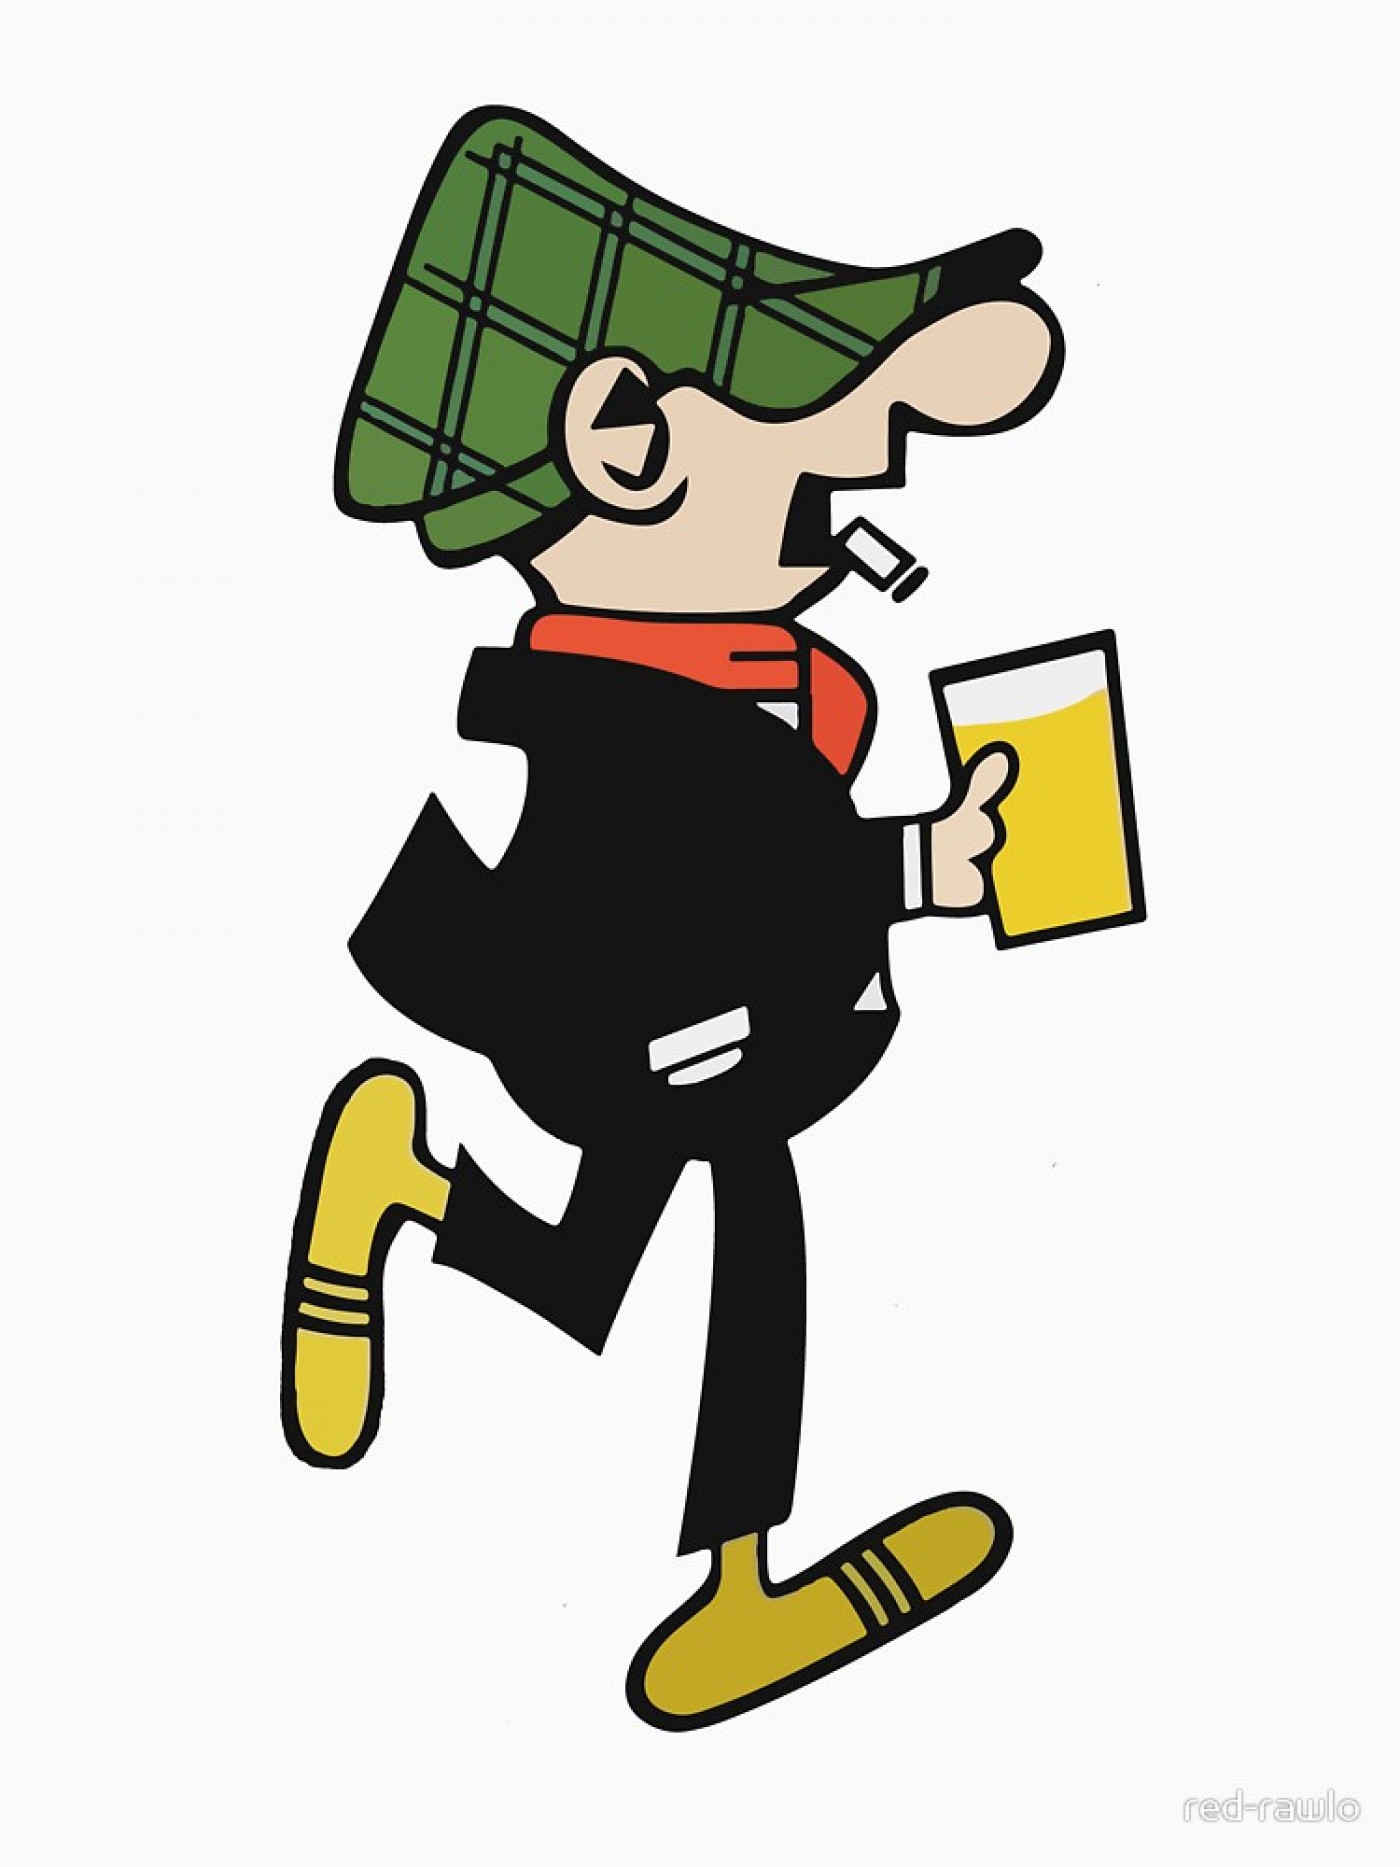 andy capp disoccupato